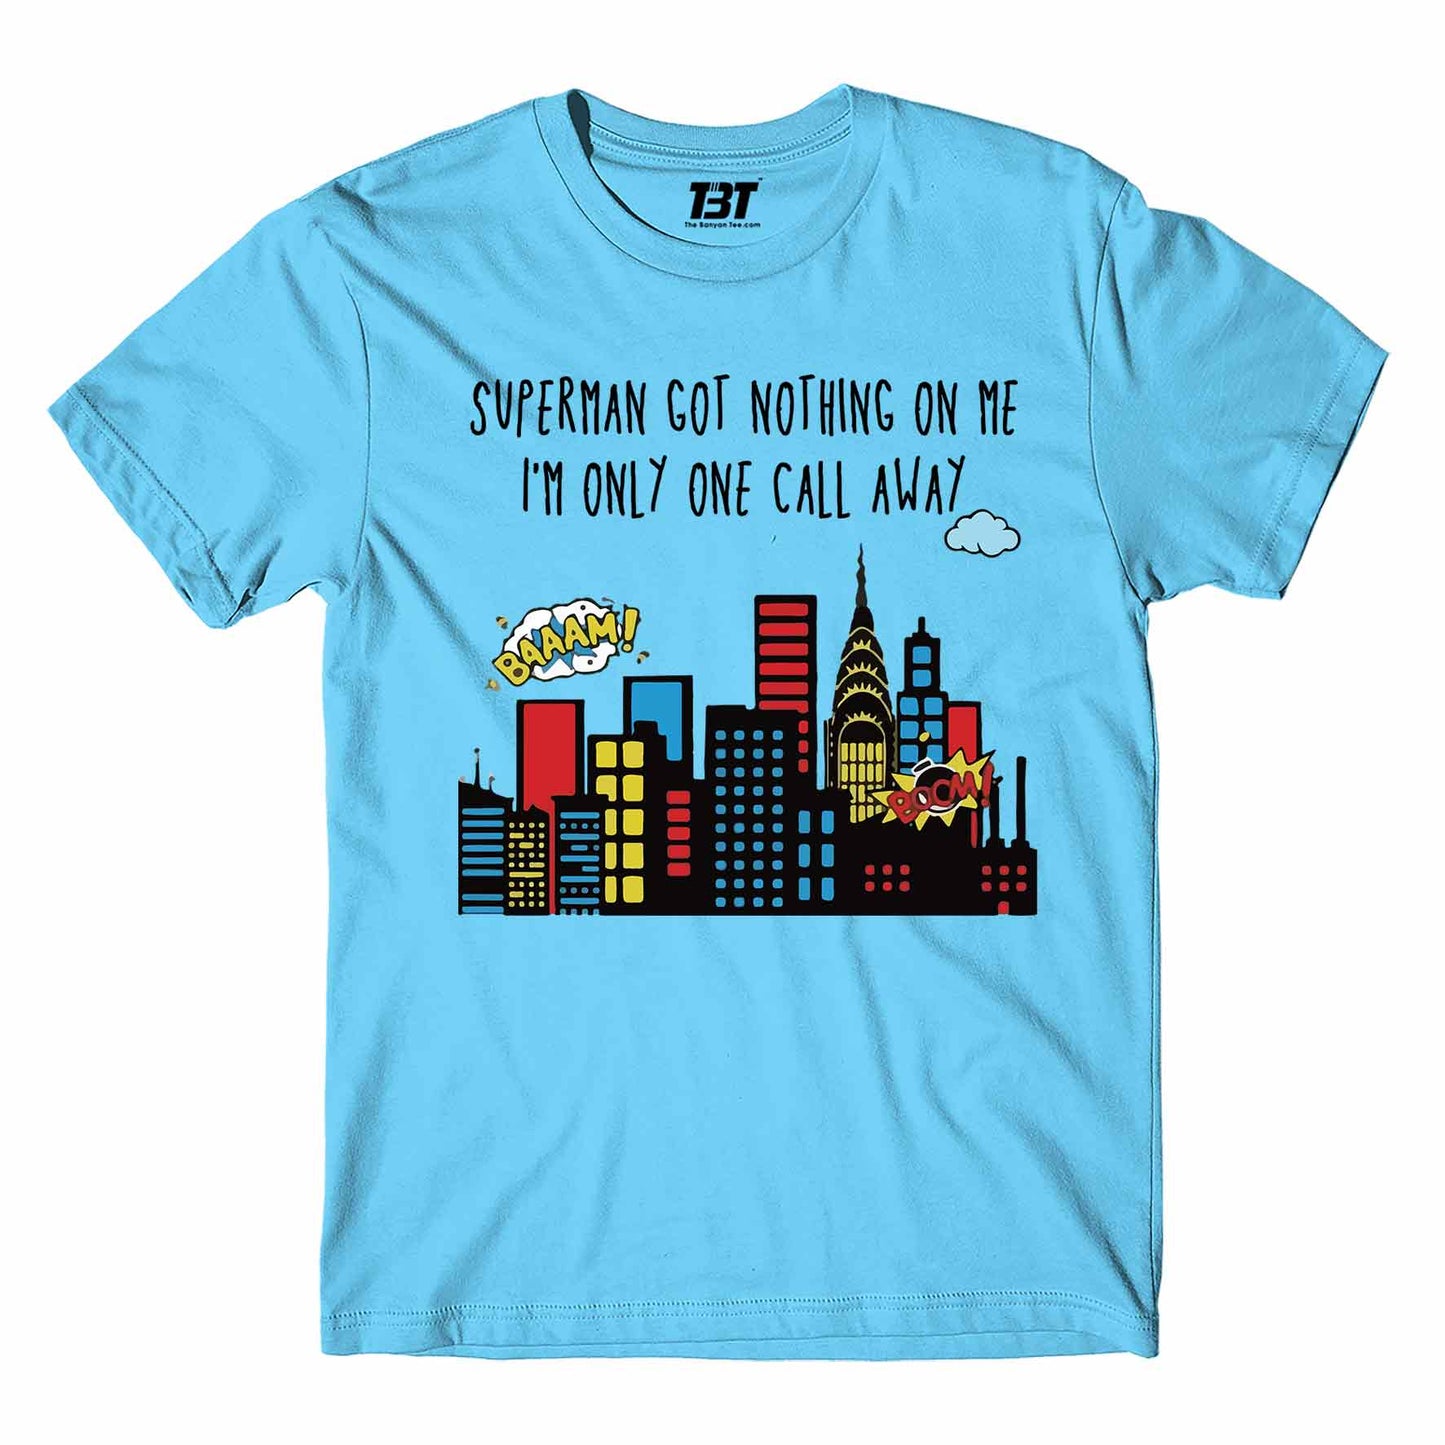 charlie puth one call away t-shirt music band buy online india the banyan tee tbt men women girls boys unisex Royal Blue superman got nothing on me i'm only one call away